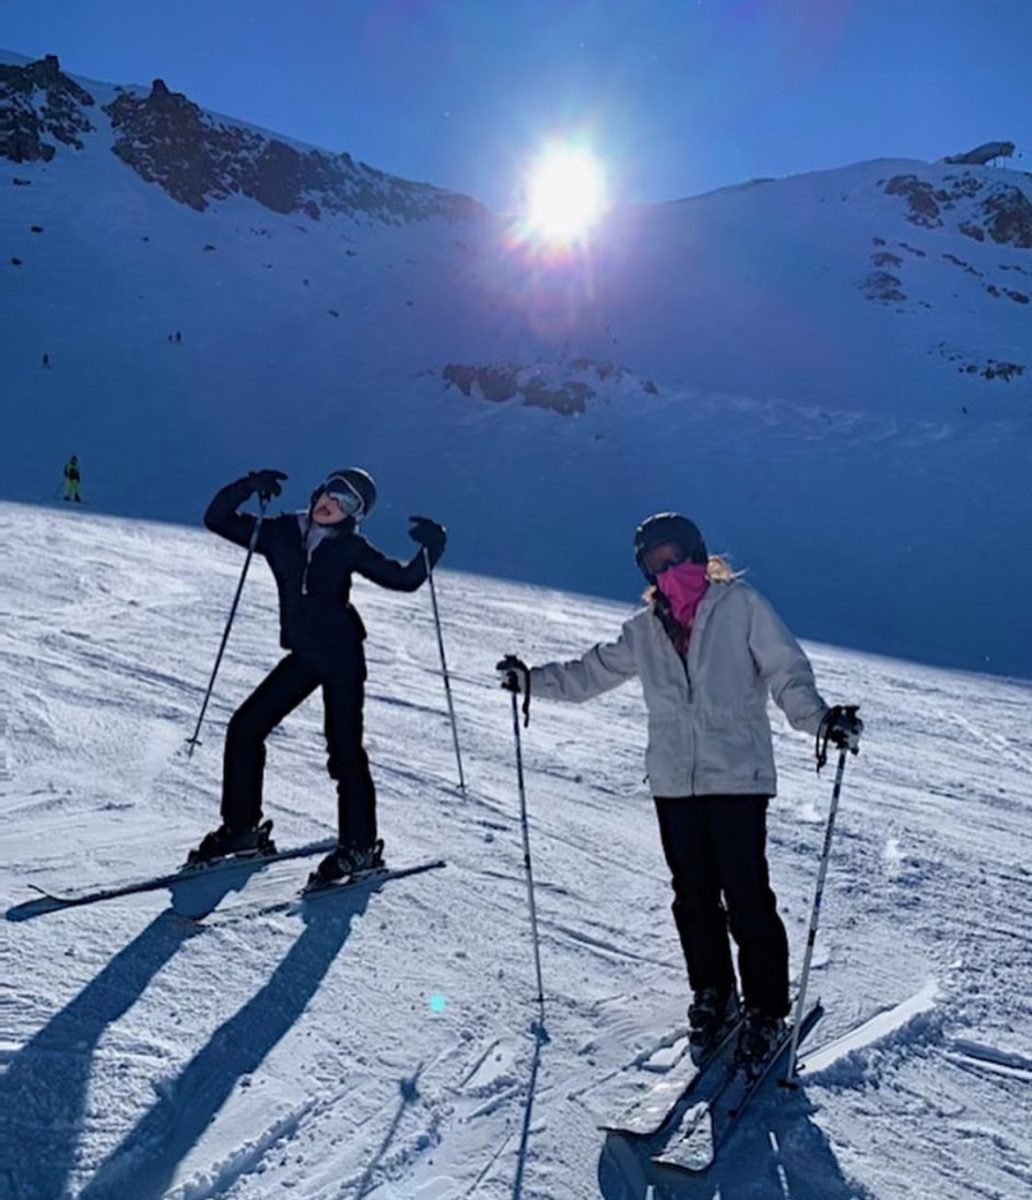 Me and my mom skiing the Saddle Bowl at Mammoth Mountain last year! 